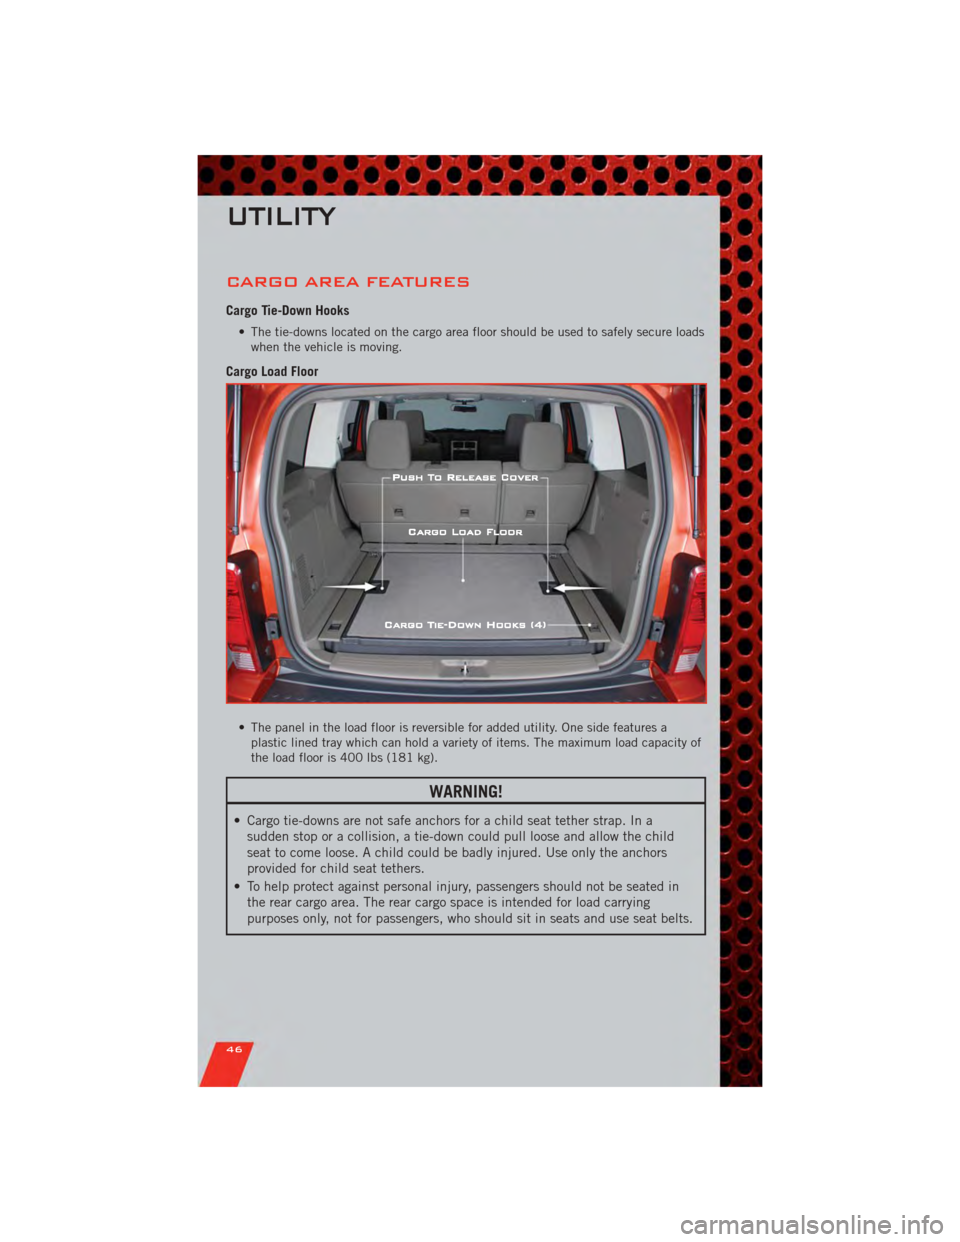 DODGE NITRO 2011 1.G User Guide CARGO AREA FEATURES
Cargo Tie-Down Hooks
• The tie-downs located on the cargo area floor should be used to safely secure loadswhen the vehicle is moving.
Cargo Load Floor
• The panel in the load f